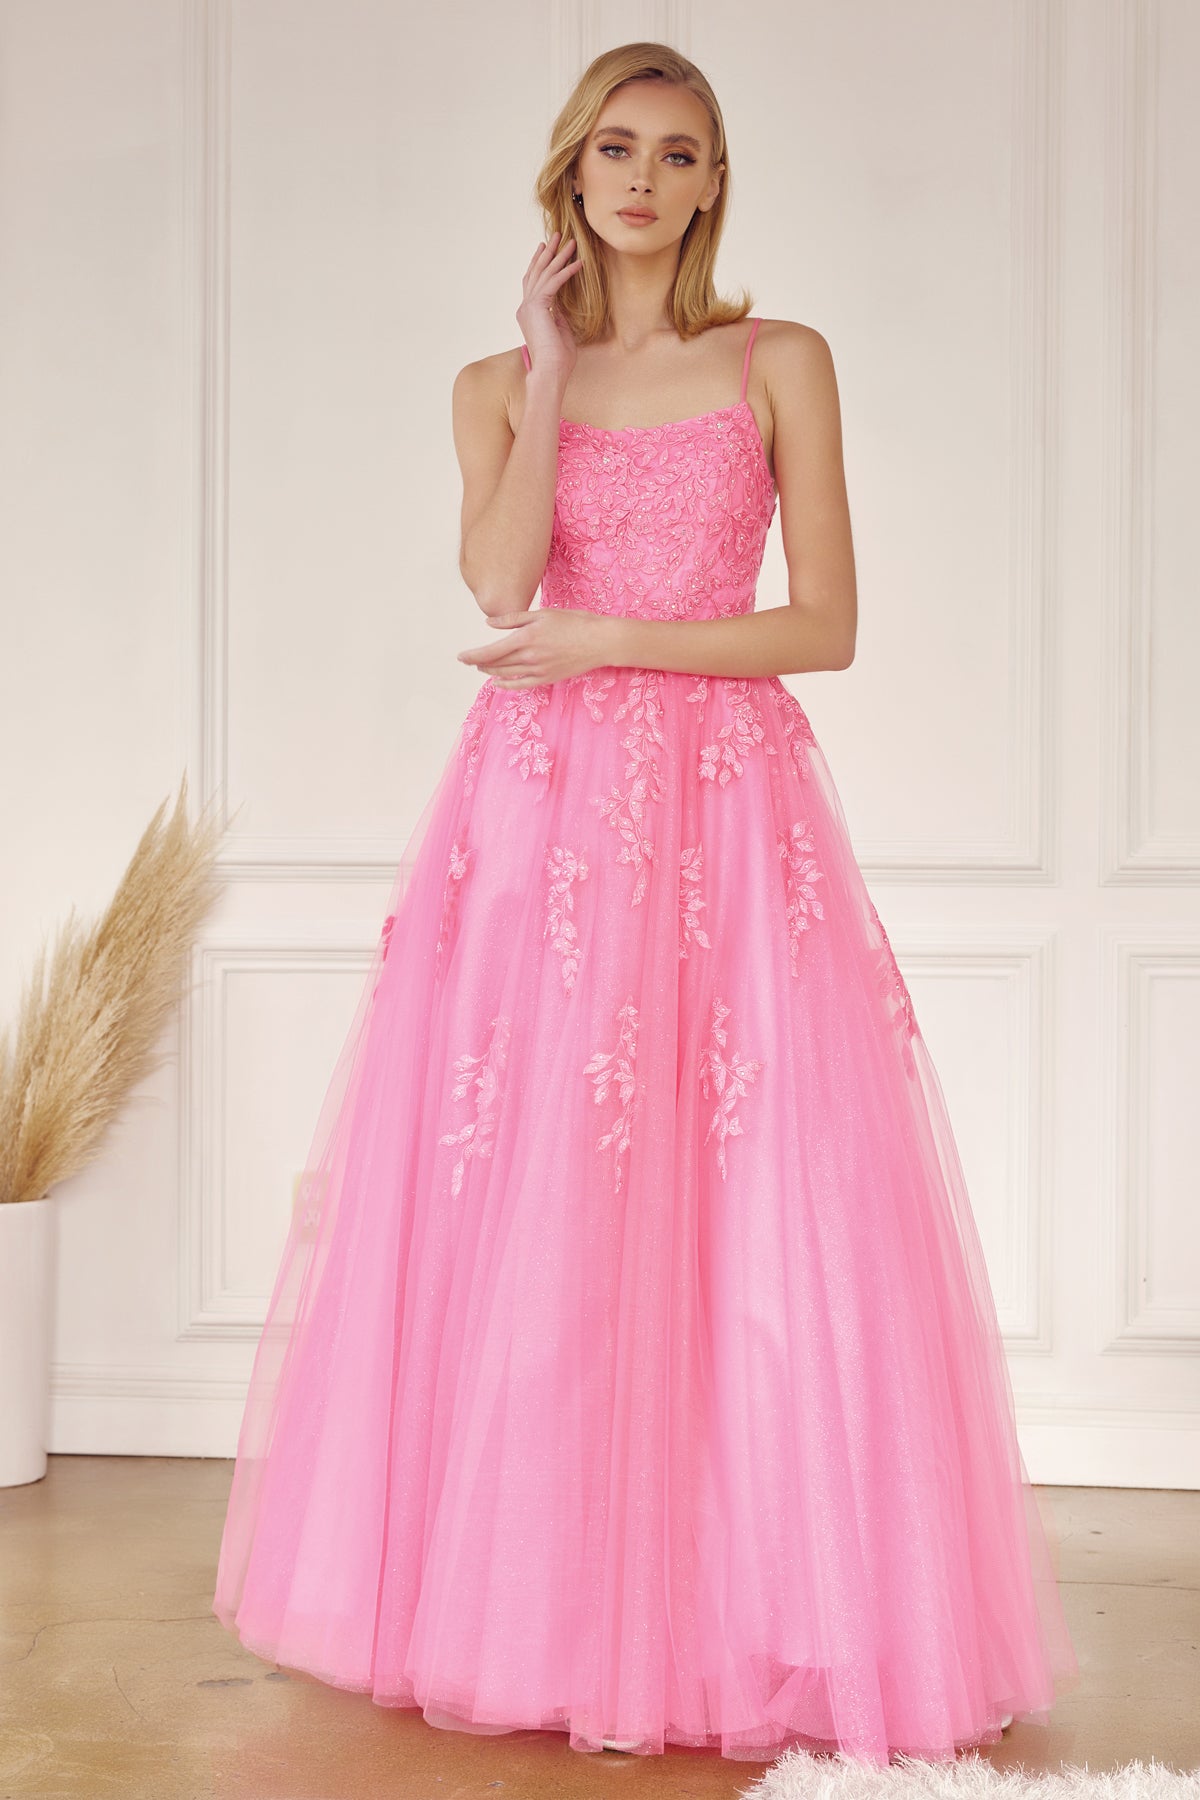 Tulle Prom Dress w/ Floral Applique-smcdress